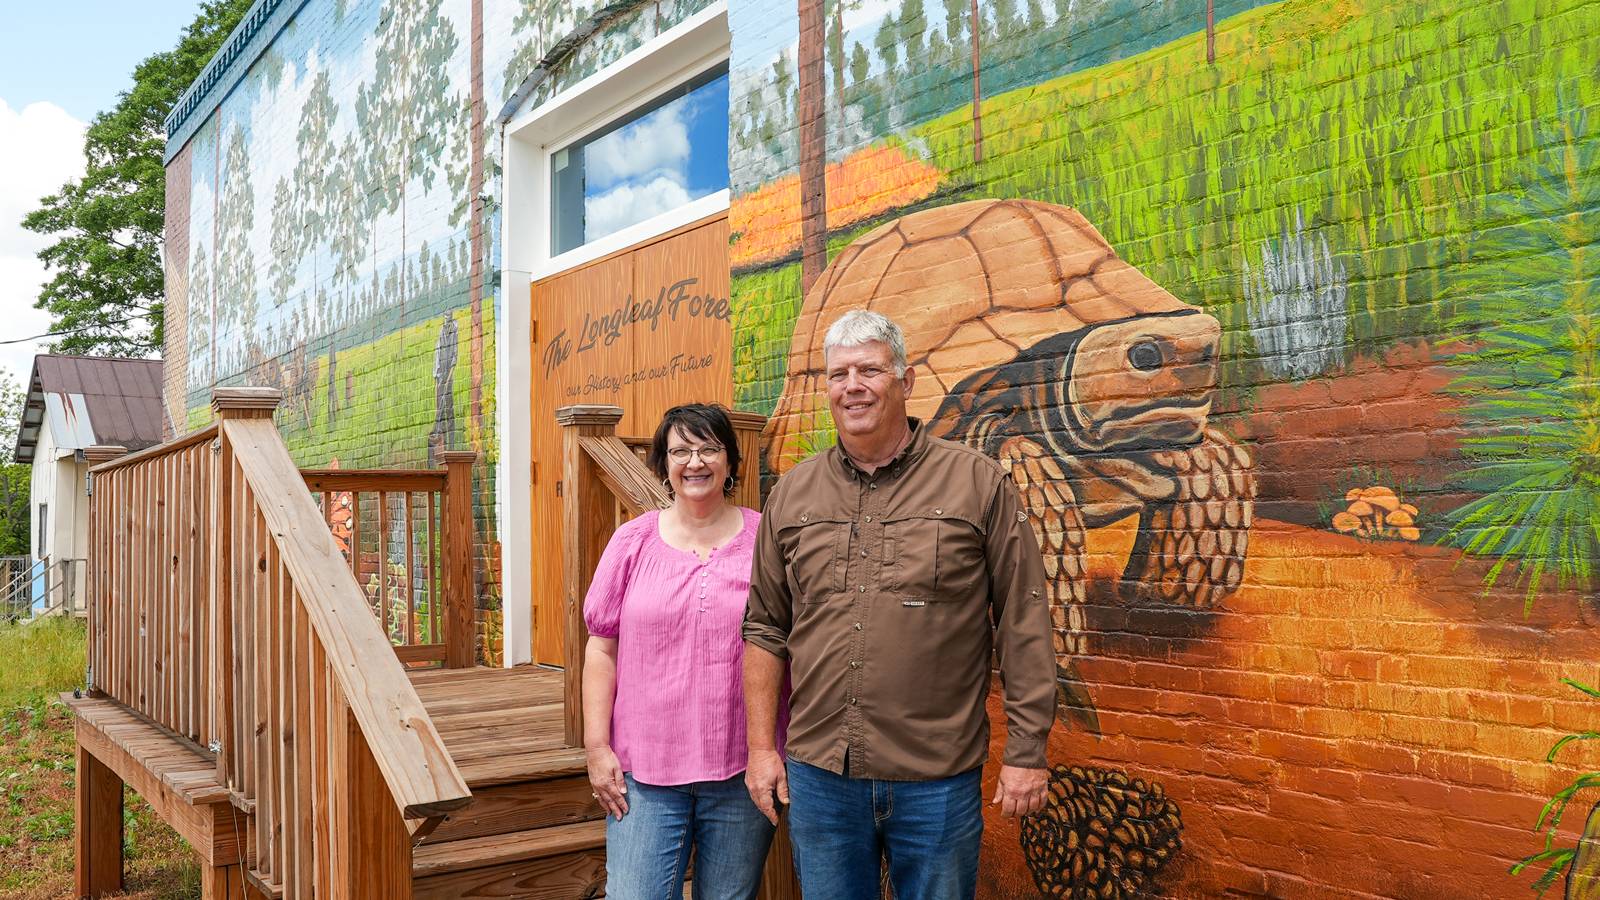 Jay and Faye Wells, longtime residents of the Buena Vista area, stand in front of the mural.